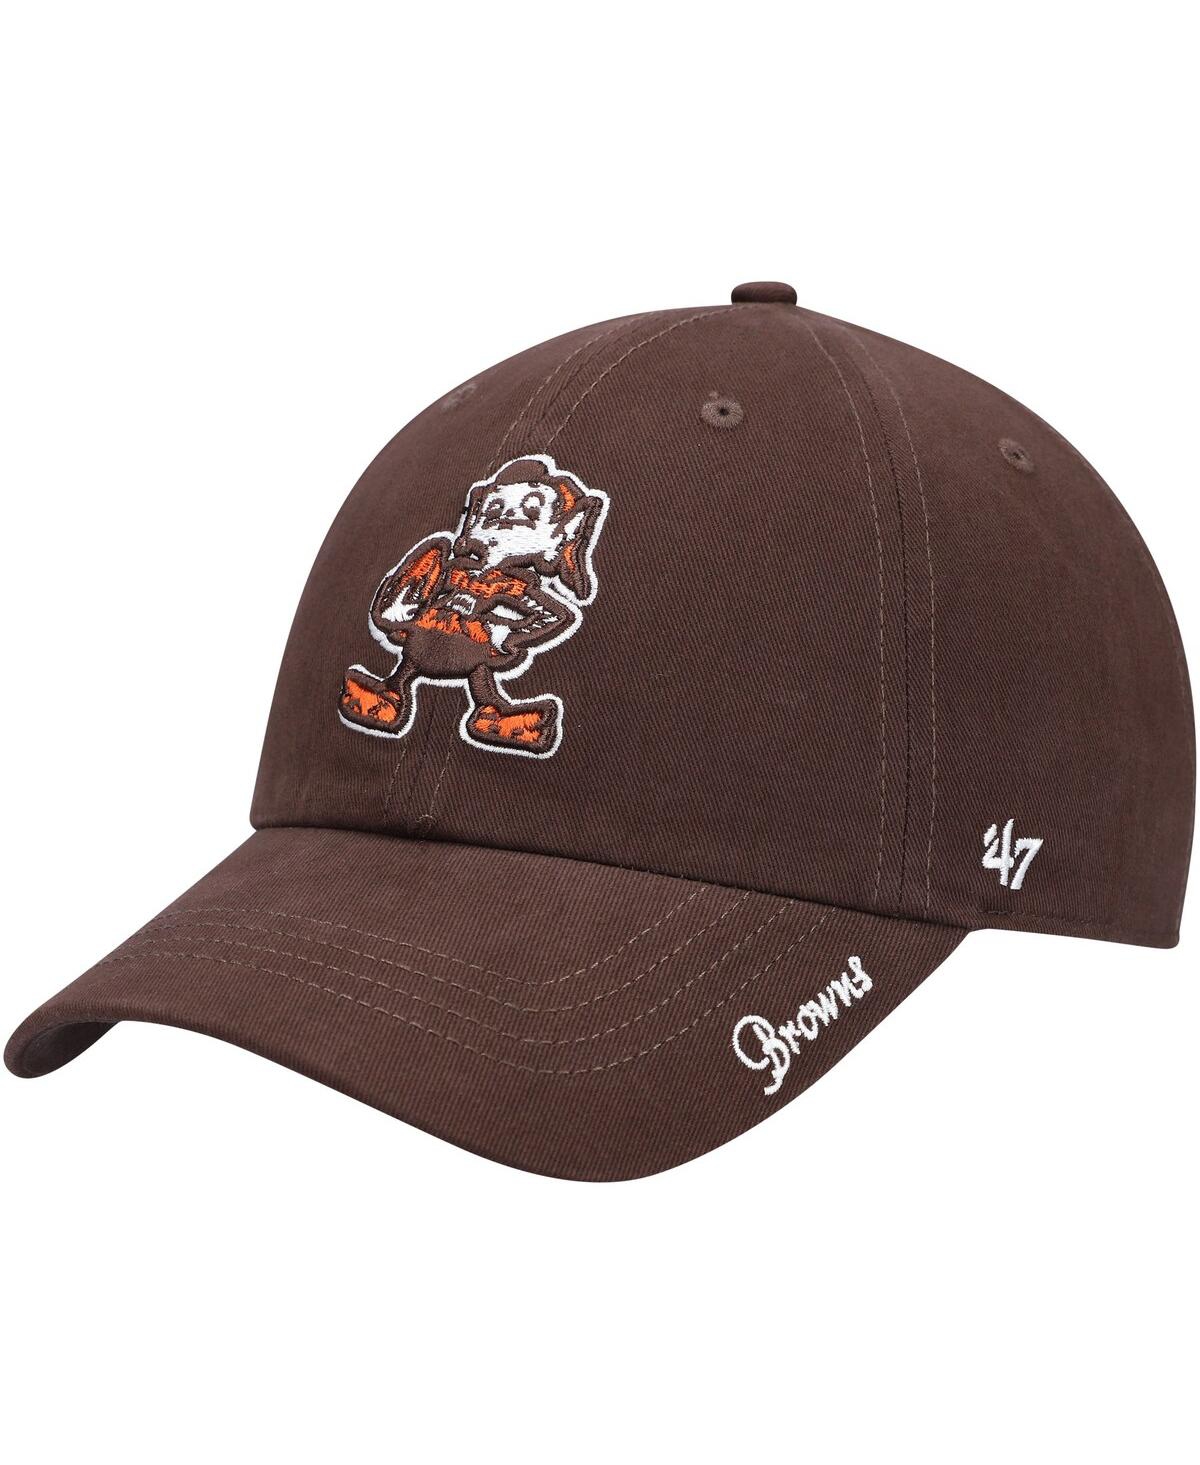 47 Brand Women's '47 Brown Cleveland Browns Miata Clean Up Legacy Adjustable Hat